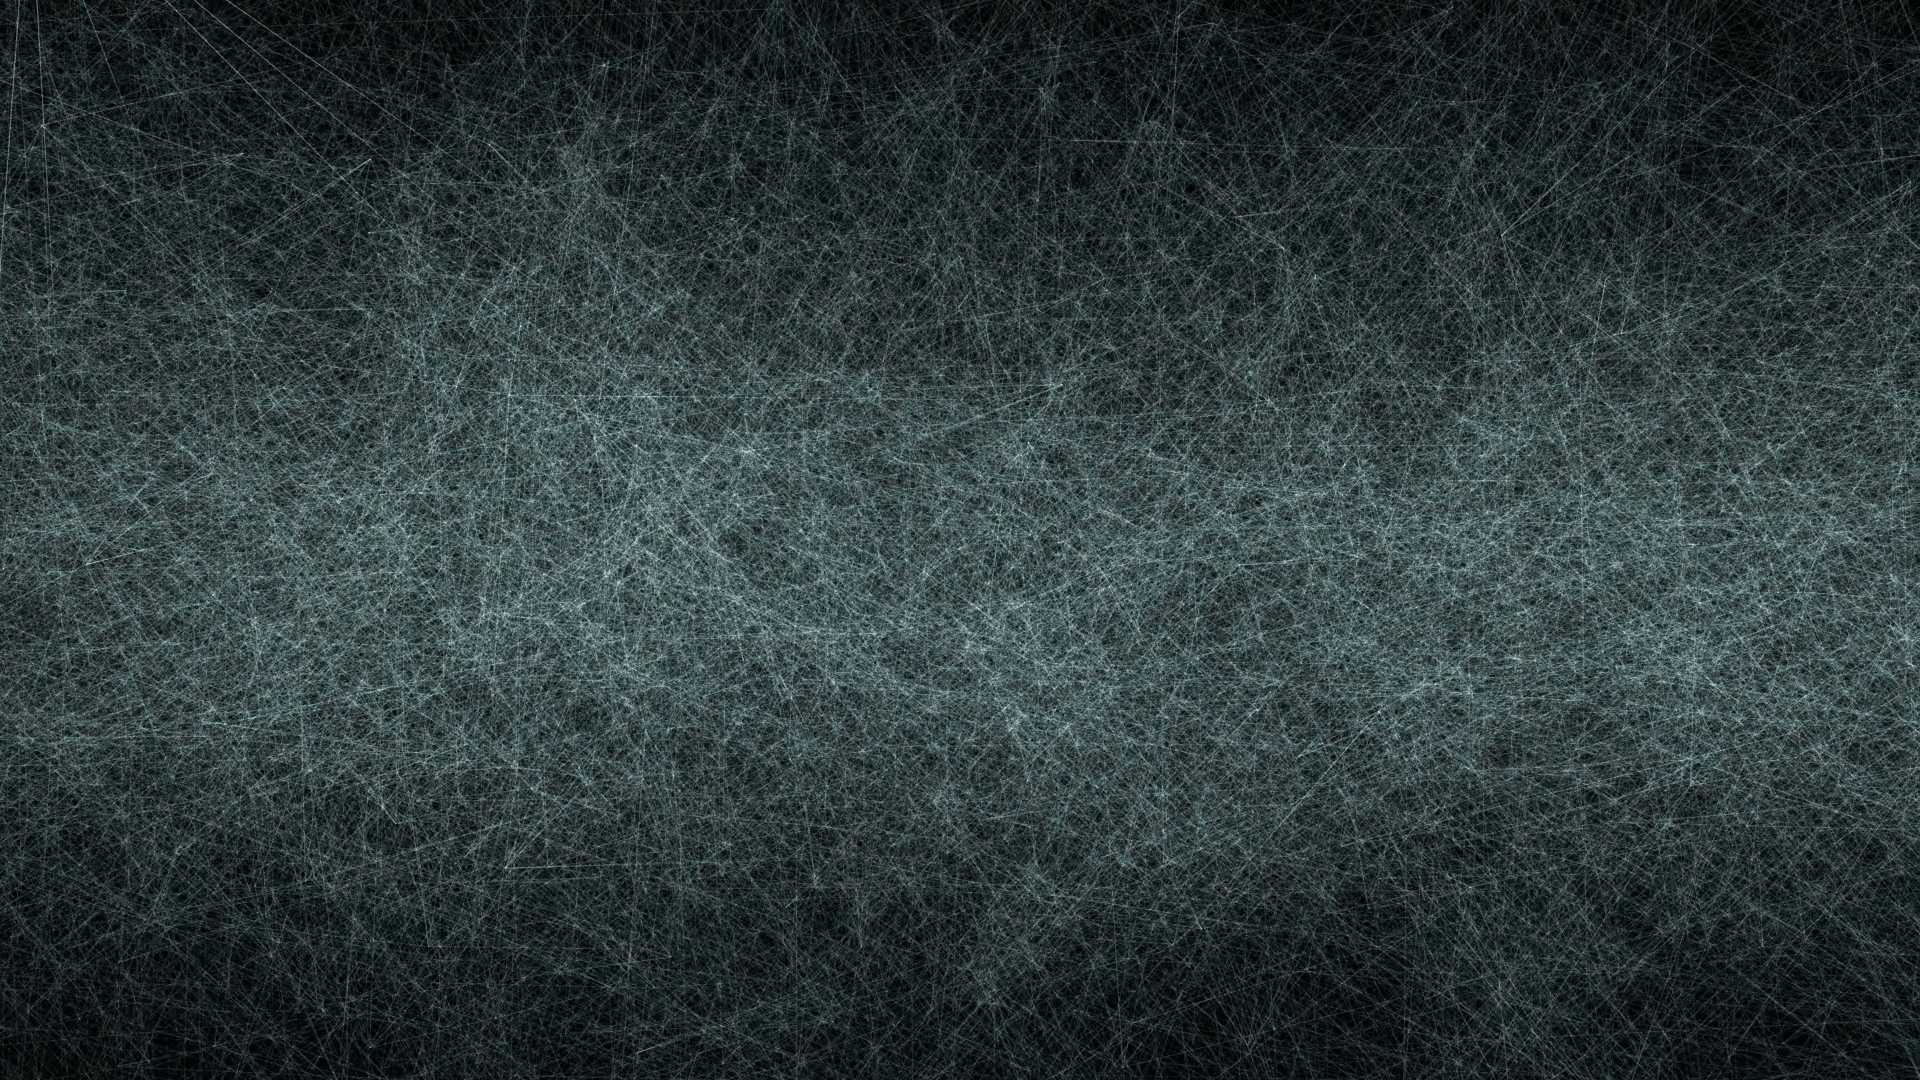 Blue Grunge Texture abstract loop background animation. Can be used